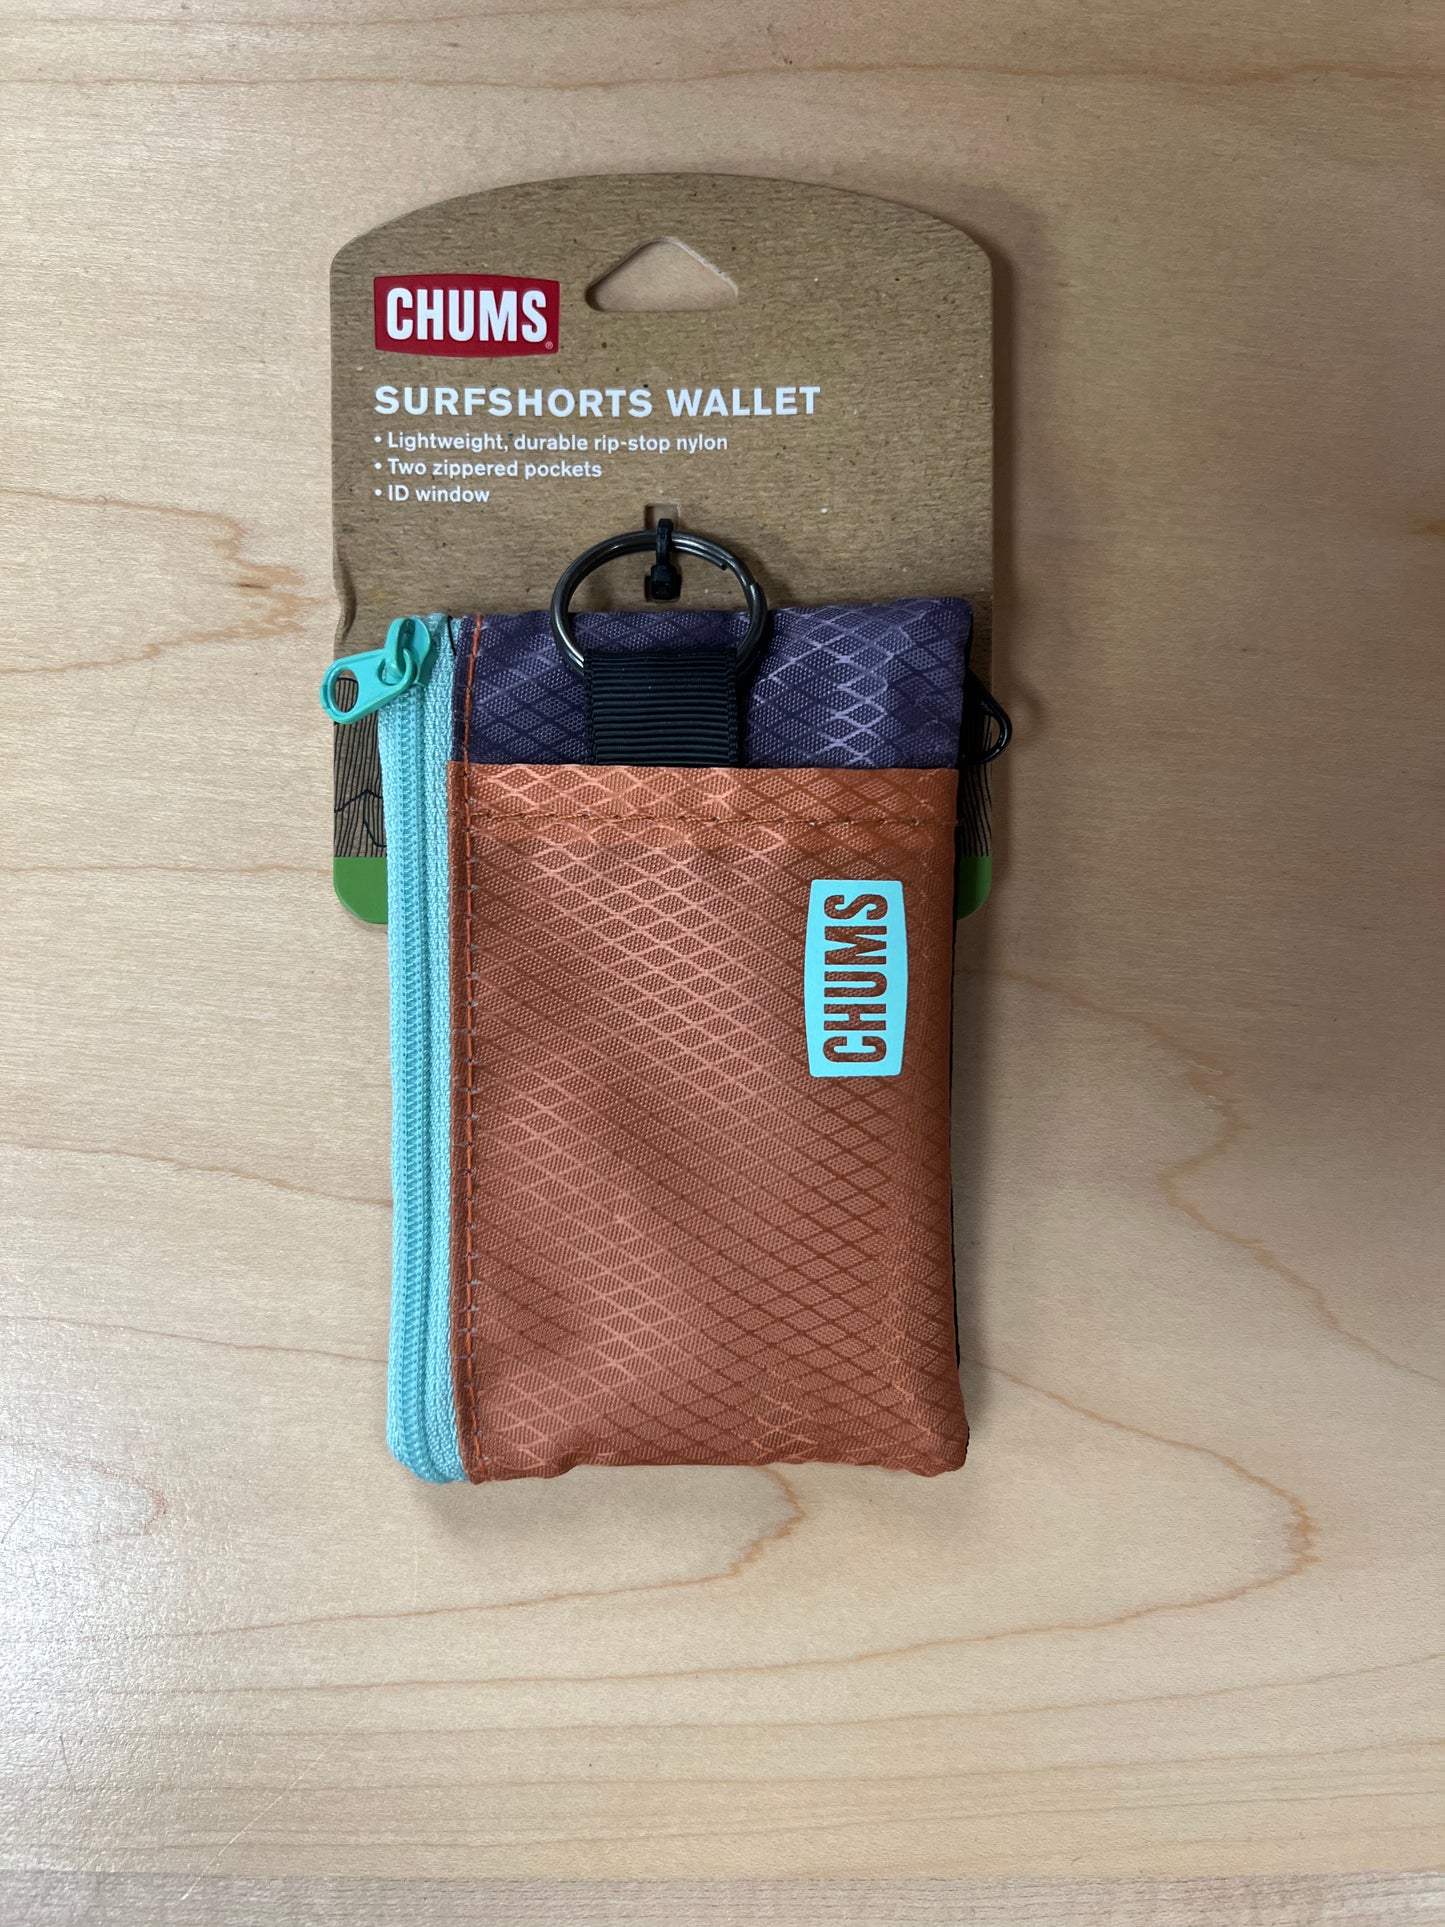 On Sale- Chums Surfshorts Wallet- Assorted Designs